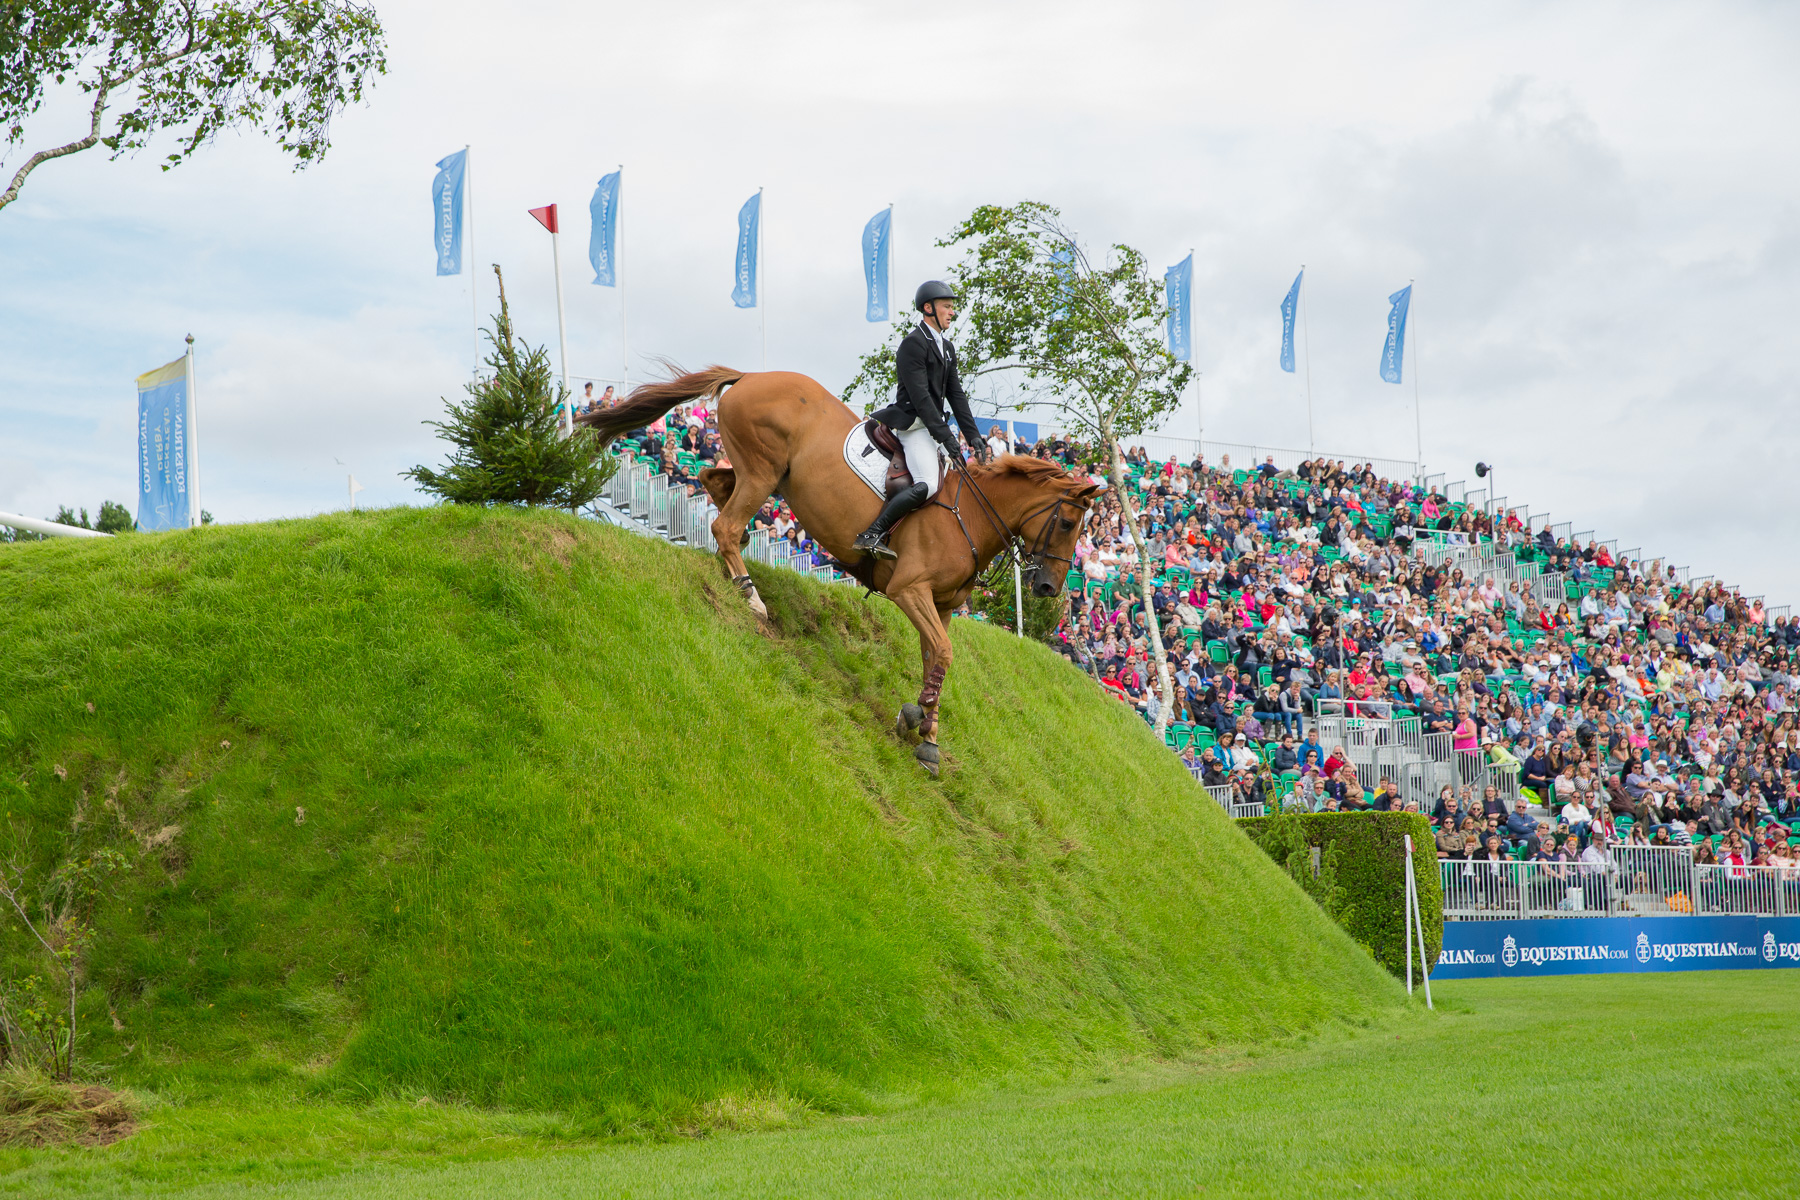 William Whitaker wins the Equestrian.com Derby at Hickstead. Image (c) Craig Payne Photography